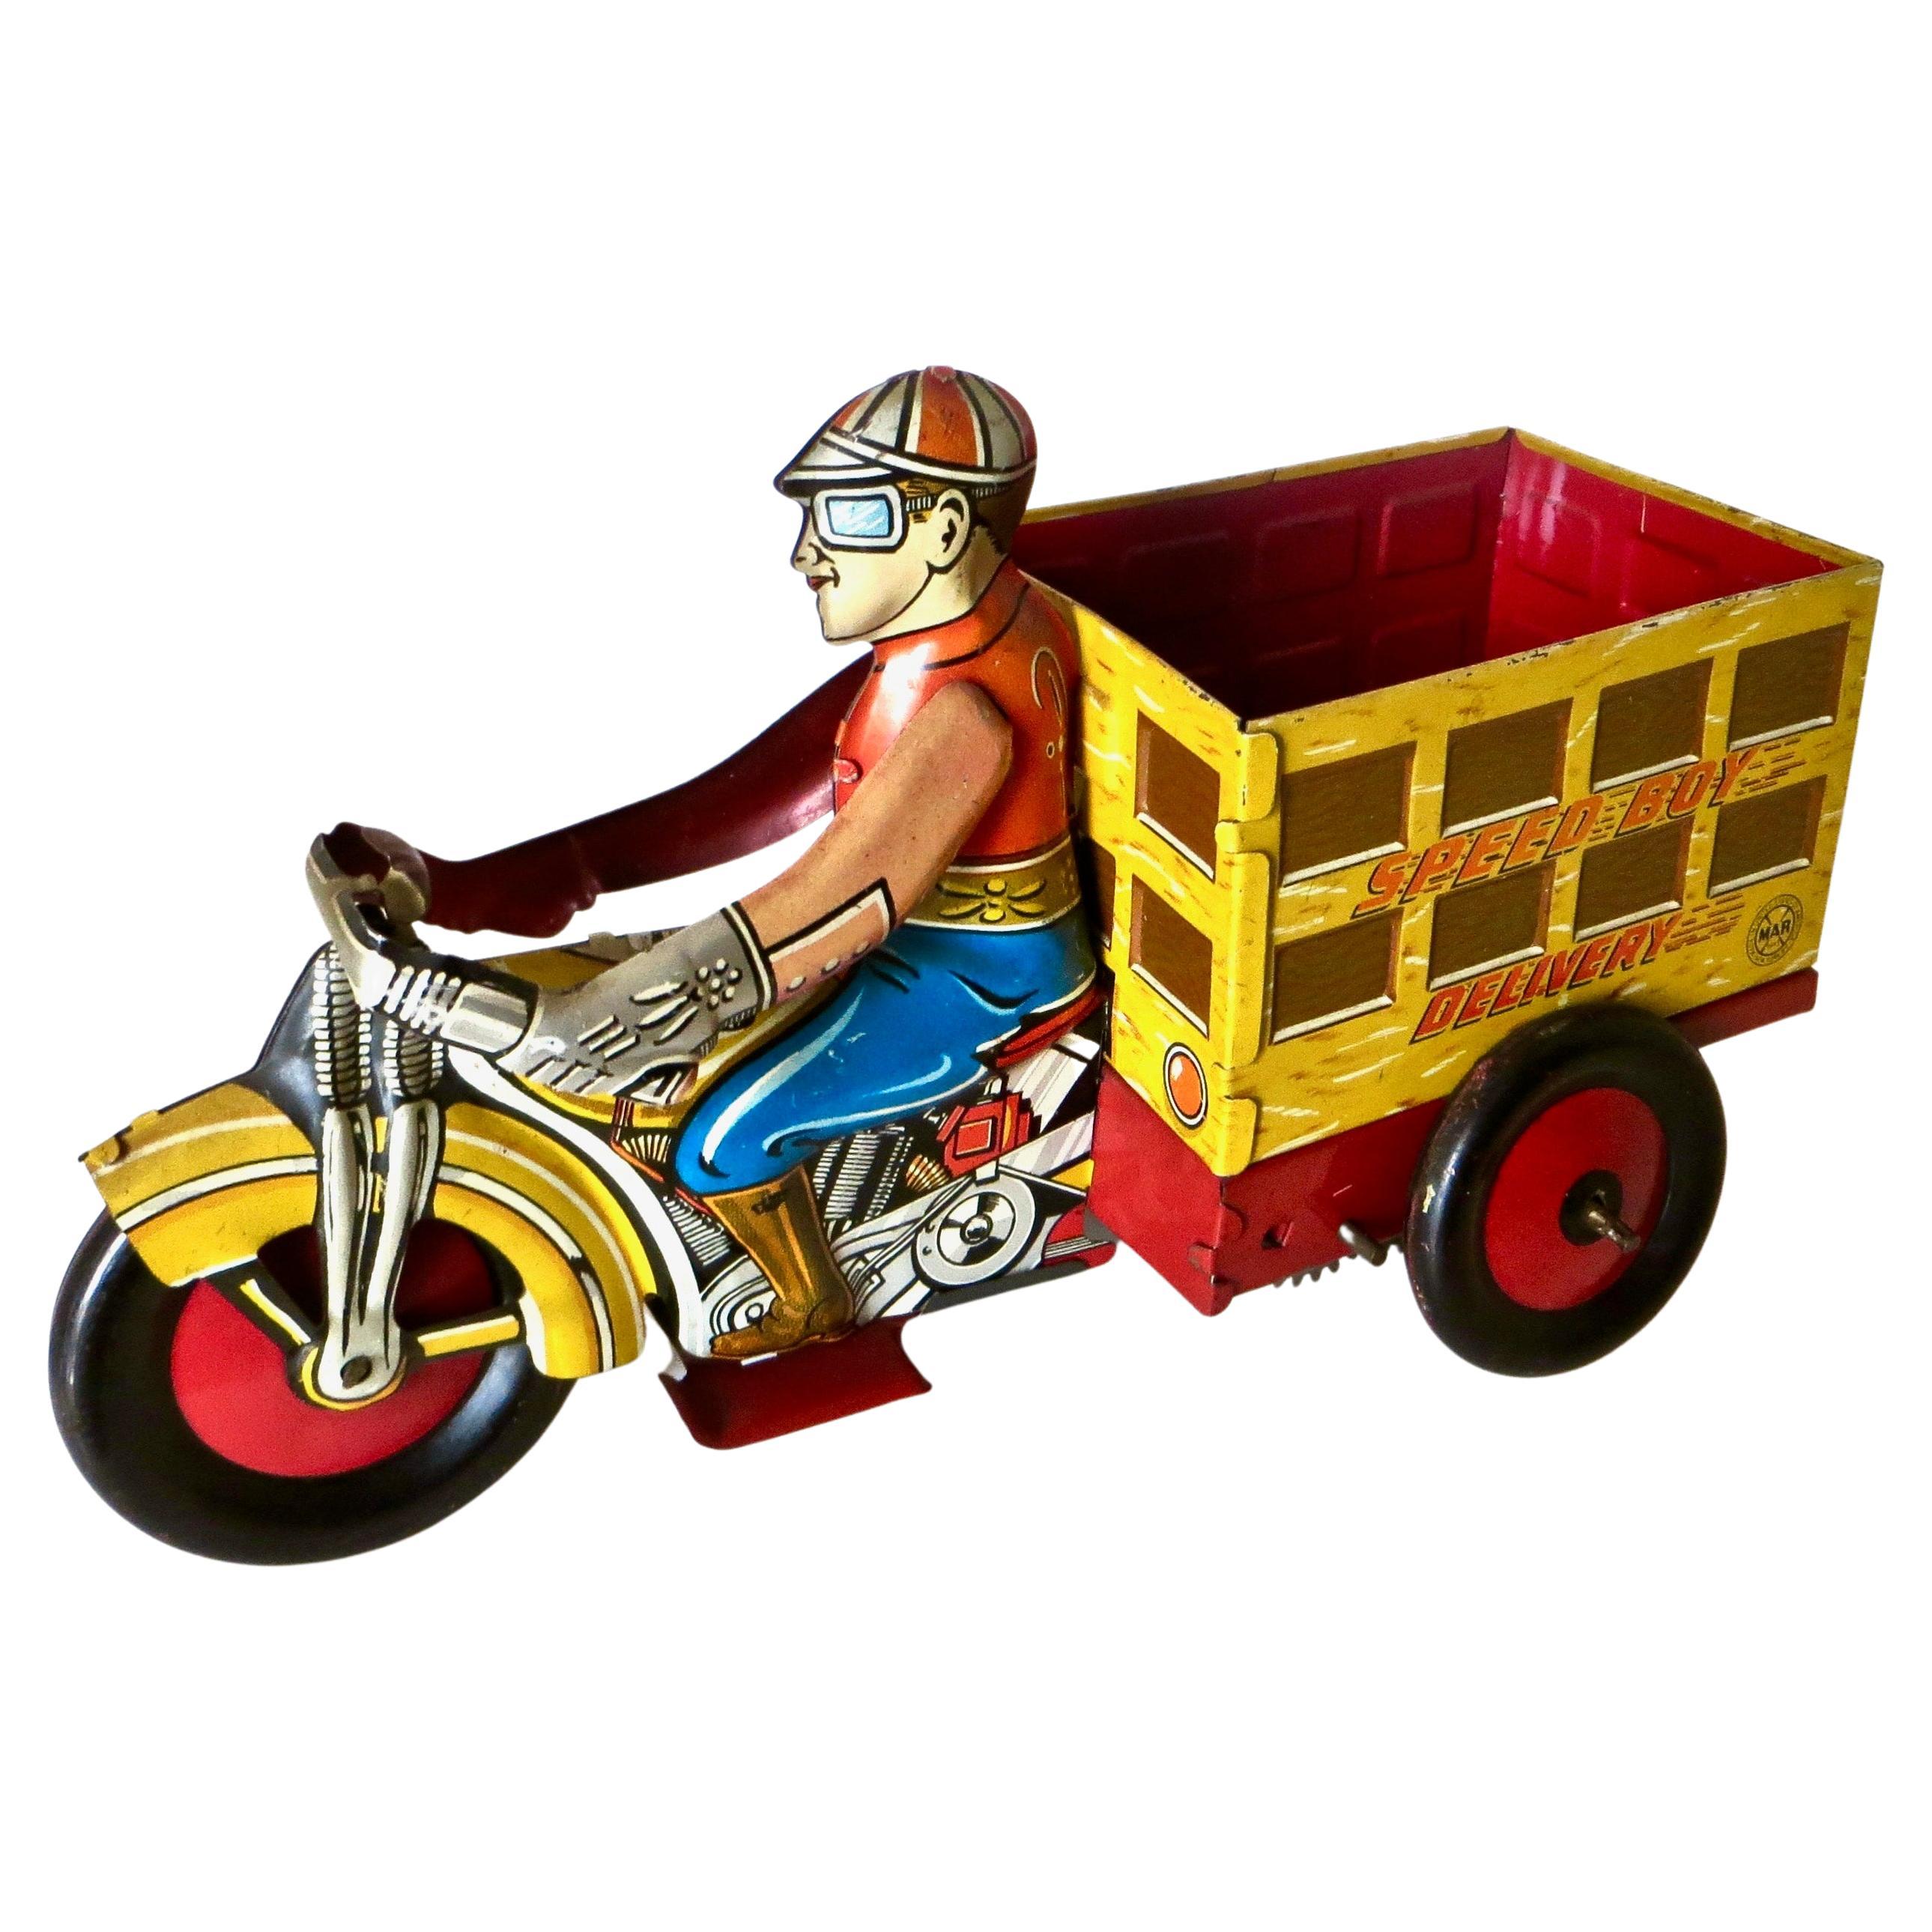 Vintage Pre-War Wind-Up Toy "Boy on Motorcycle Delivery Truck" by Marx For Sale